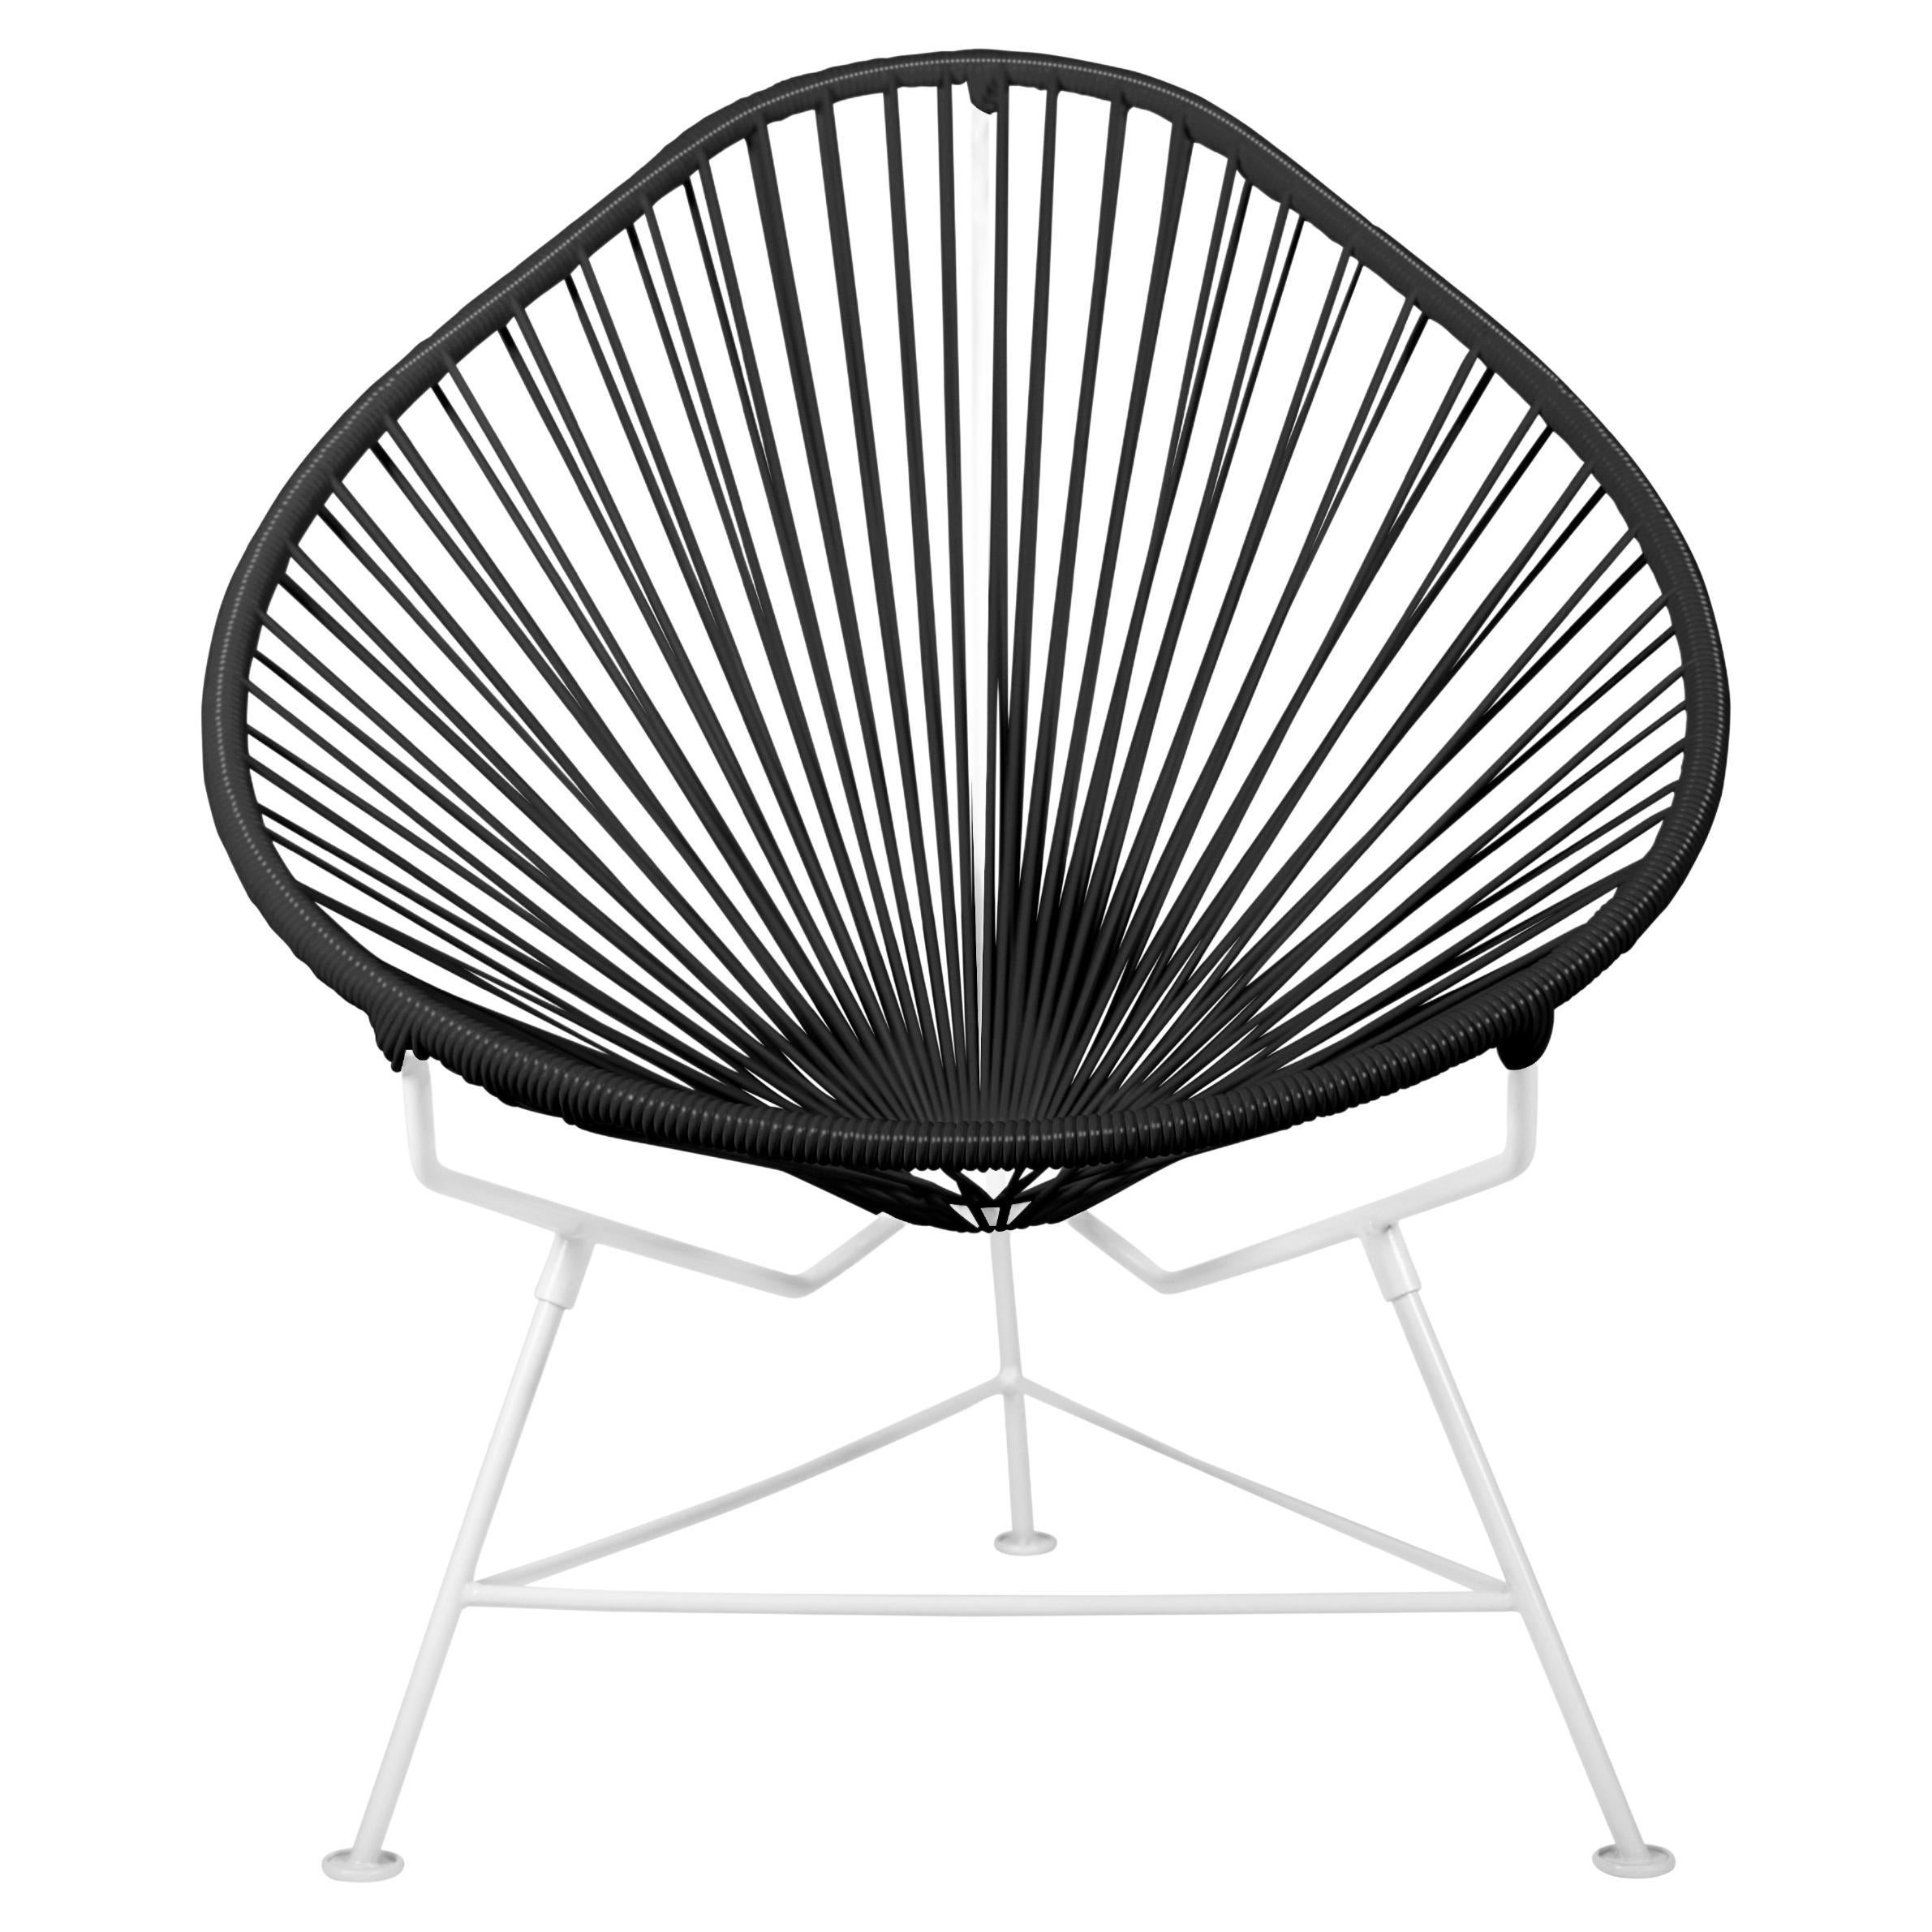 Innit Designs Acapulco Chair Black Weave on White Frame For Sale